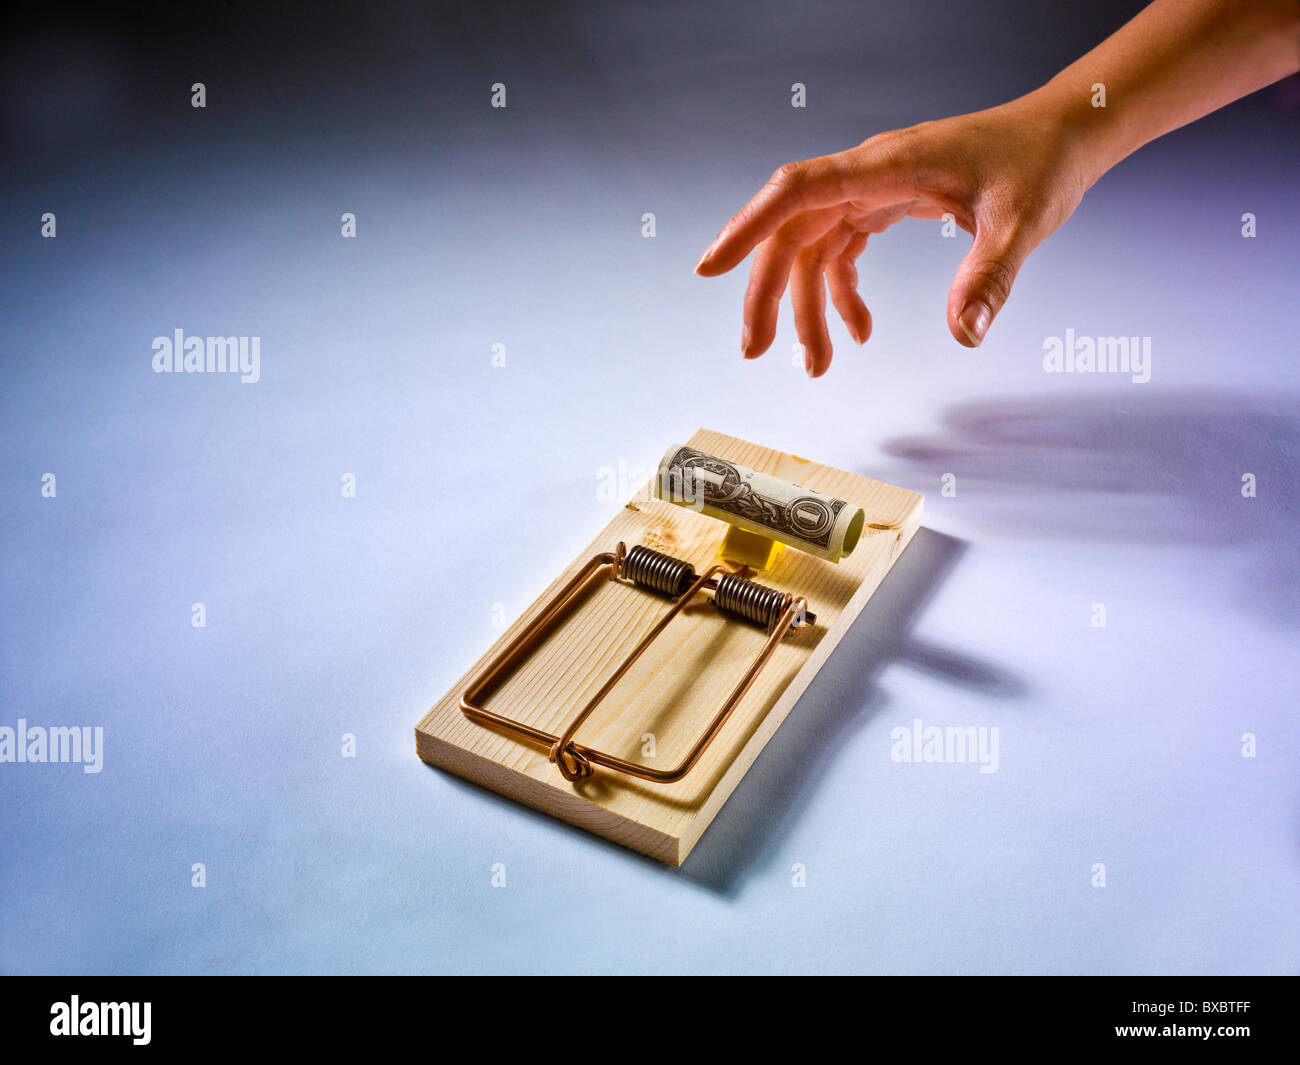 https://c8.alamy.com/comp/BXBTFF/hand-attempting-to-remove-money-from-large-mouse-trap-BXBTFF.jpg